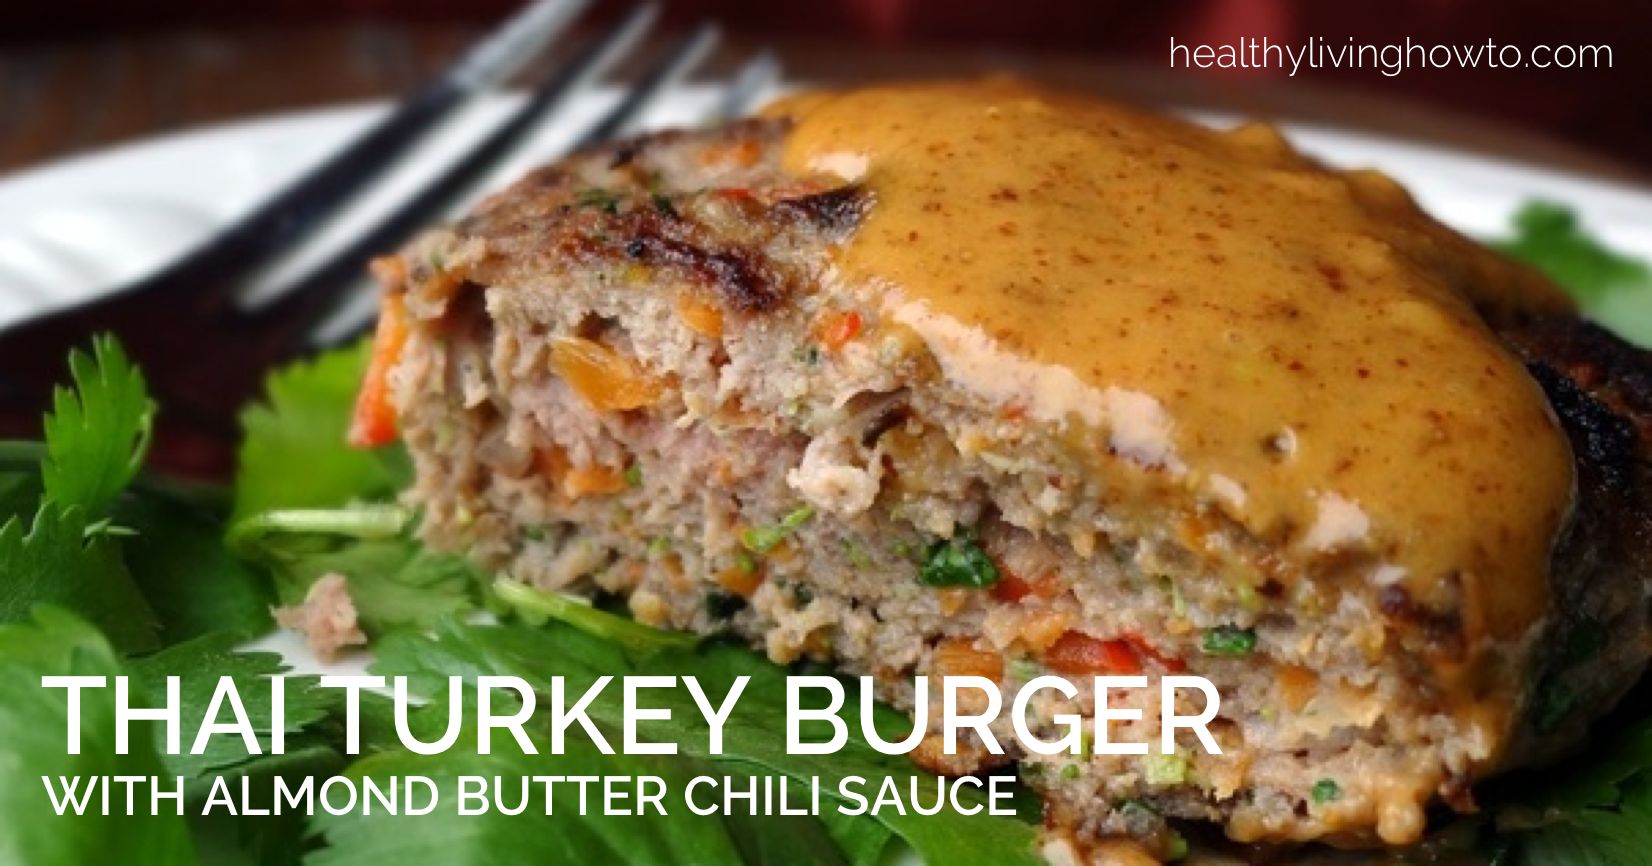 Thai Turkey Burger With Almond Butter Chili Sauce | healthylivinghowto.com